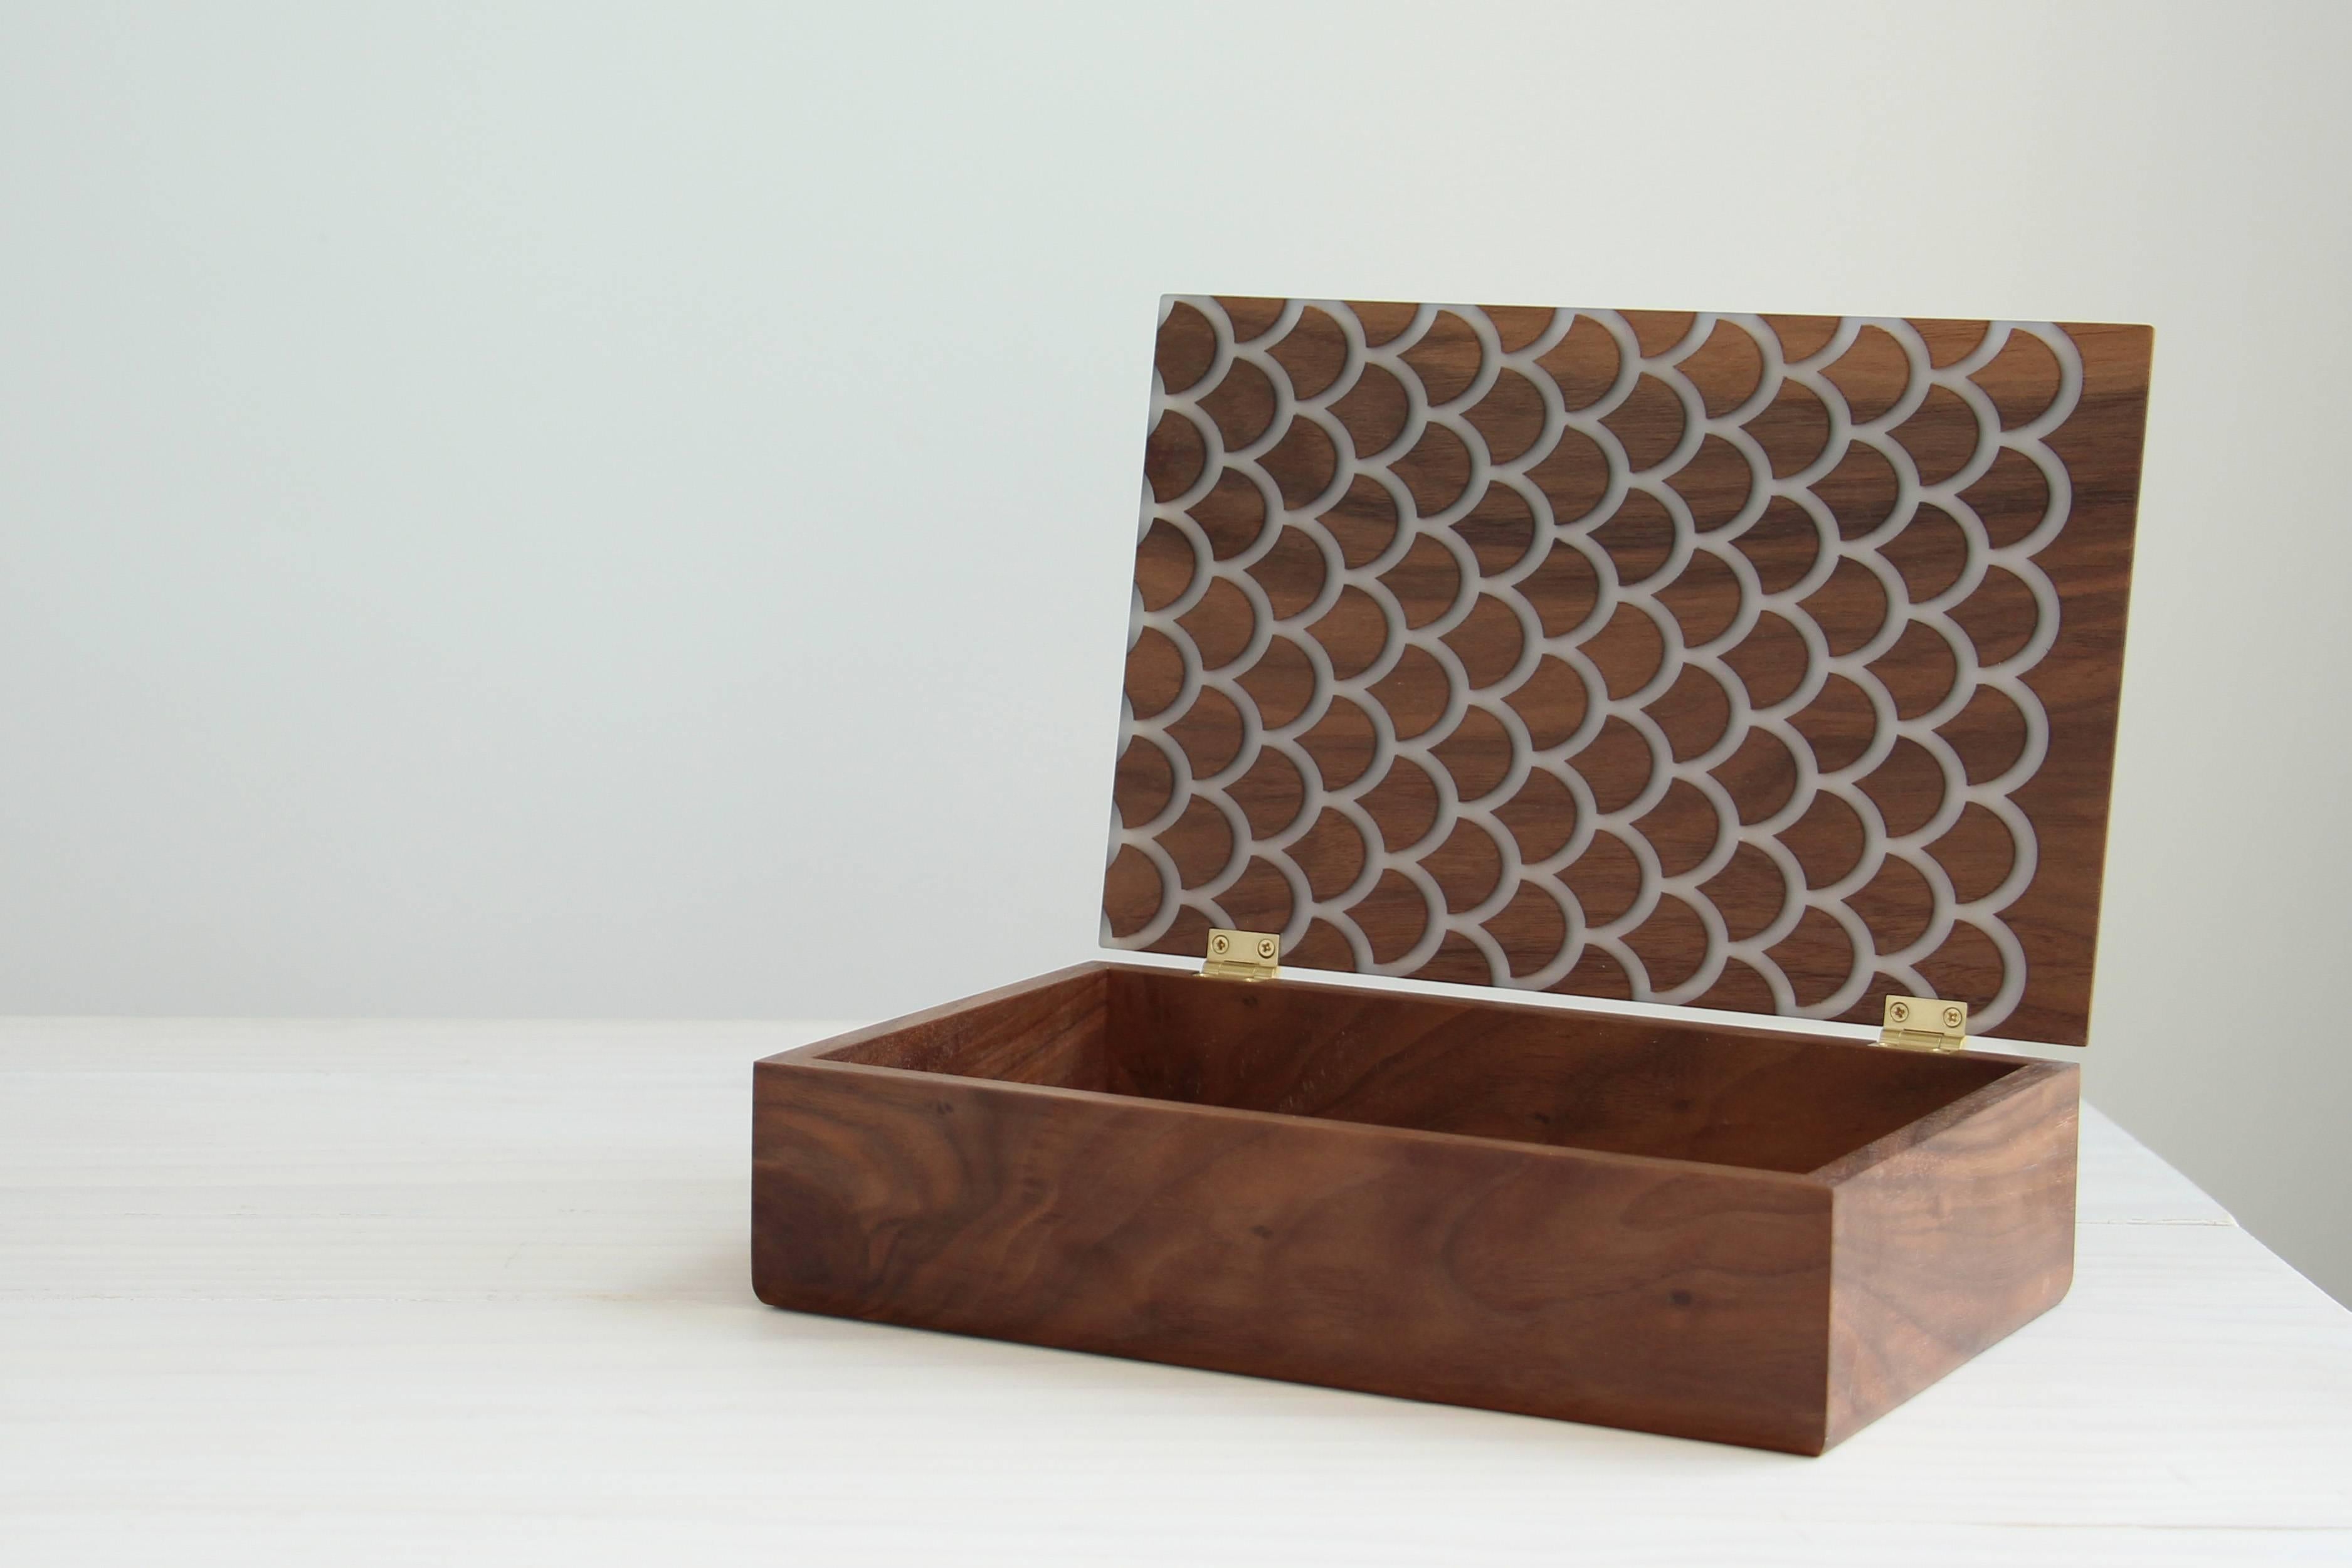 This limited edition treasure box is made from solid American walnut with inlaid resin in our Koi design.

Inspired by the scales of Japanese ornamental fish, the Koi pattern is carved straight through the wood to capture the light, giving the resin